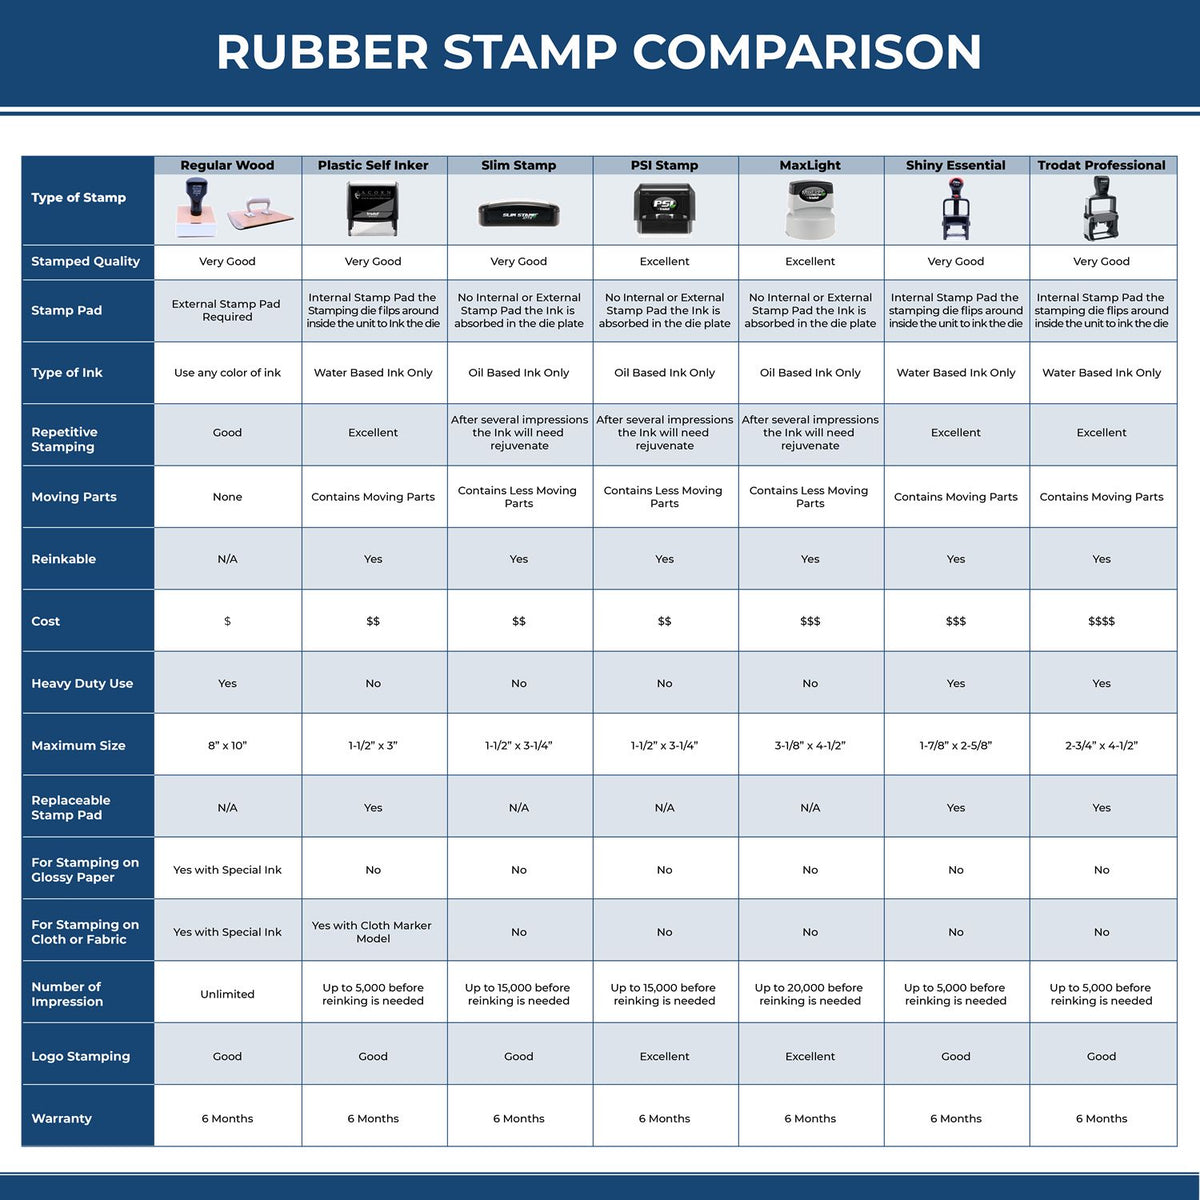 A comparison chart for the different types of mount models available for the Heavy-Duty Michigan Rectangular Notary Stamp.